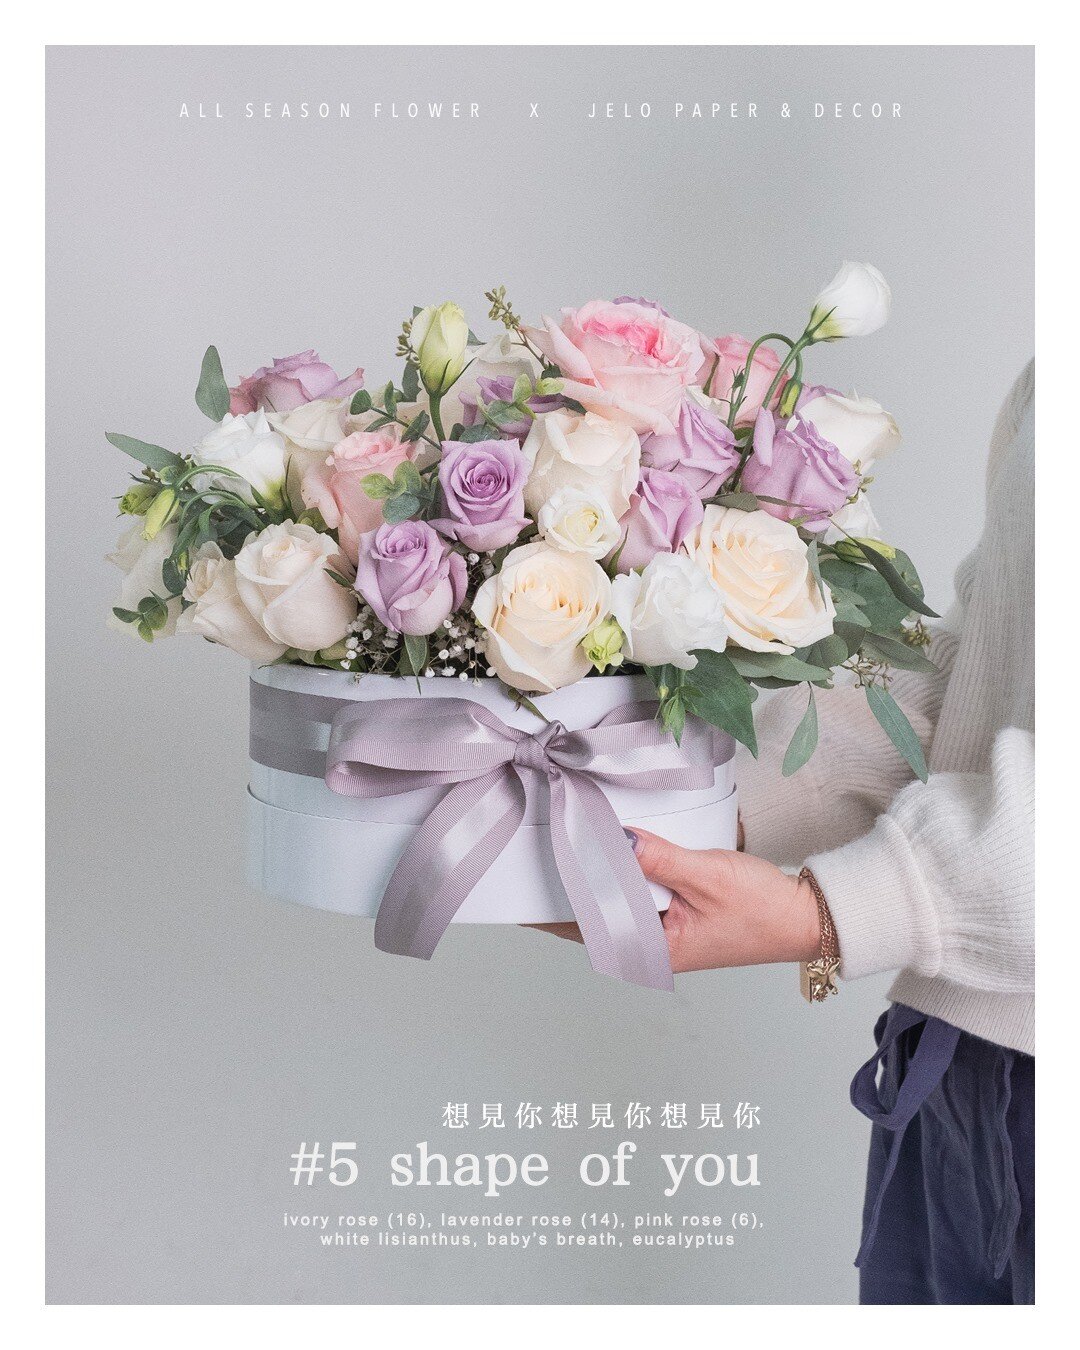 🌷 Valentine's flowers collection

#5 Shape of You 
想見你想見你想見你

15% off (1/4 - 1/25)

Free! Lyrics message card

How to order : 
Message us or Online order : 
www.allseasonflower.com/vday21

$12 Delivery flat rate to 5 boroughs
Free pick up in Brookly